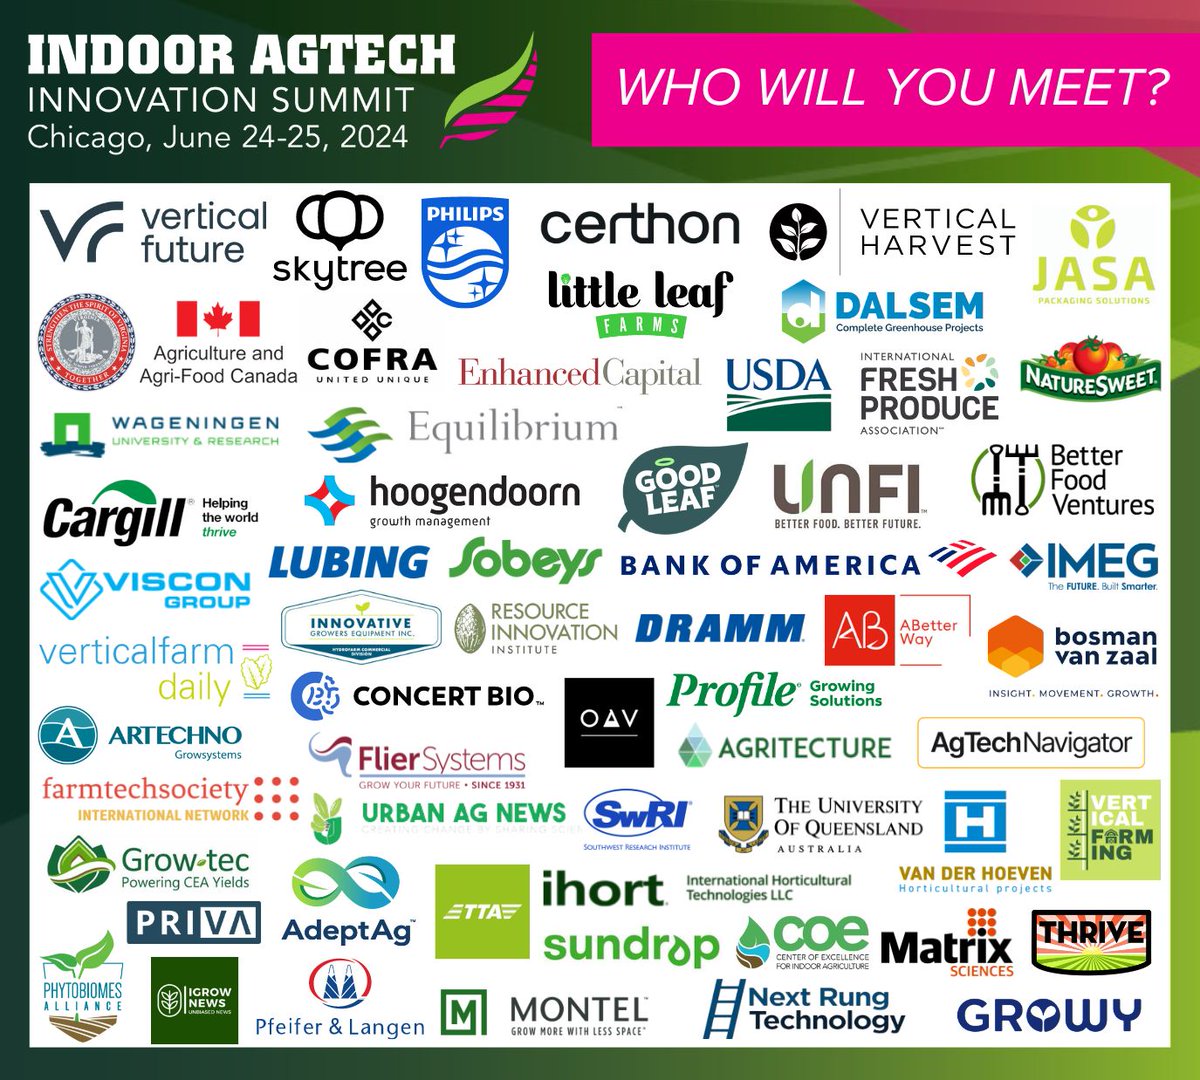 We’re counting down the days until we will be exhibiting and speaking at the @IndoorAgTech Innovation Summit in Chicago from 24-25th June! Feel free to email us on info@verticalfuture.co.uk to set up a meeting.